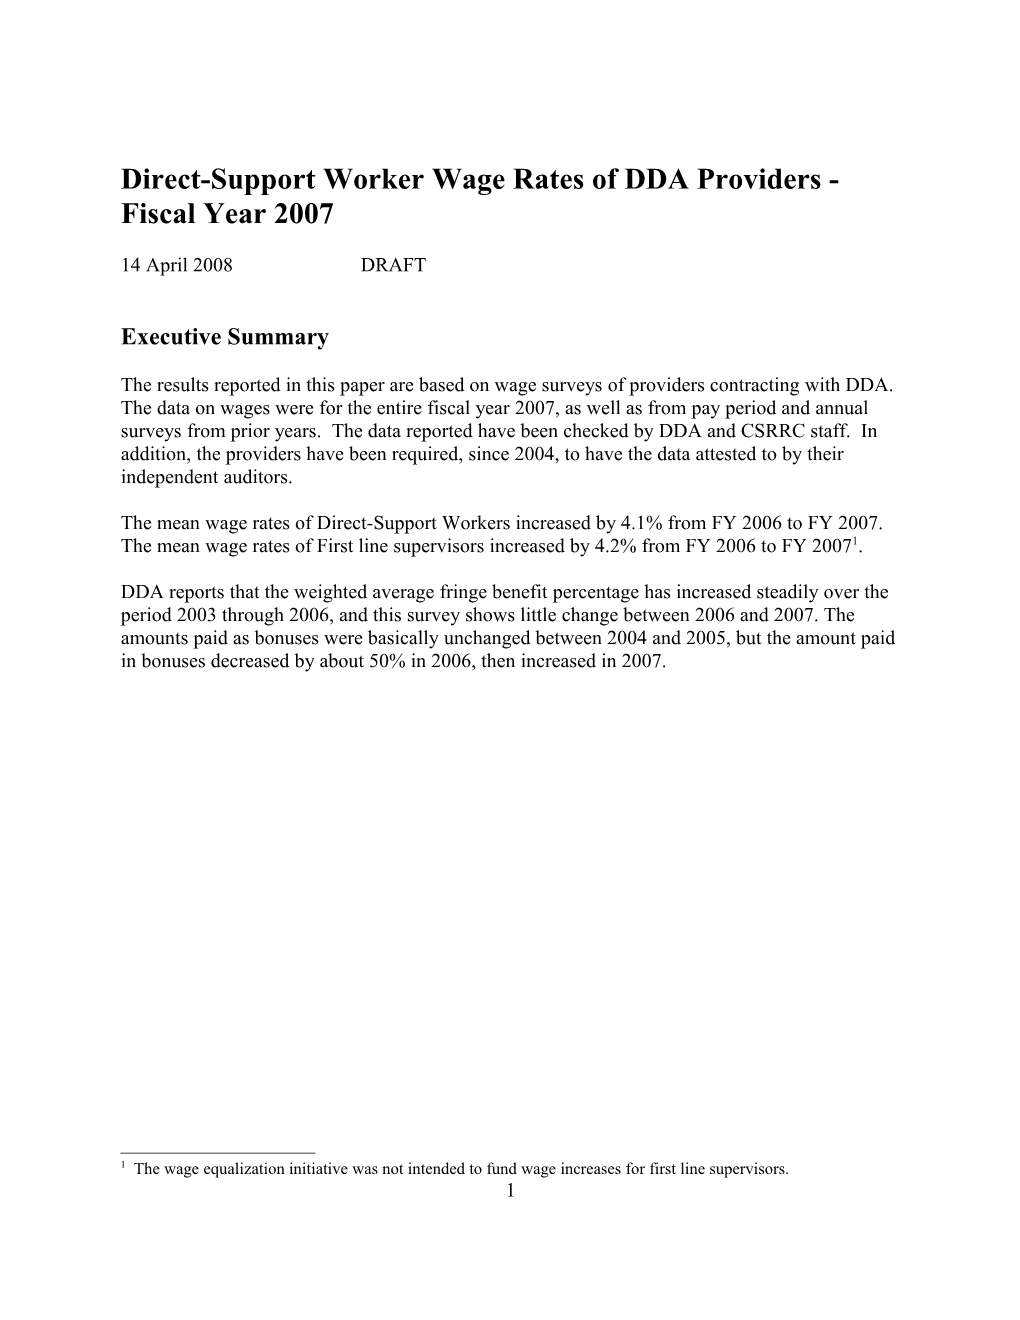 Direct-Support Worker Wage Rates of DDA Providers - 2006